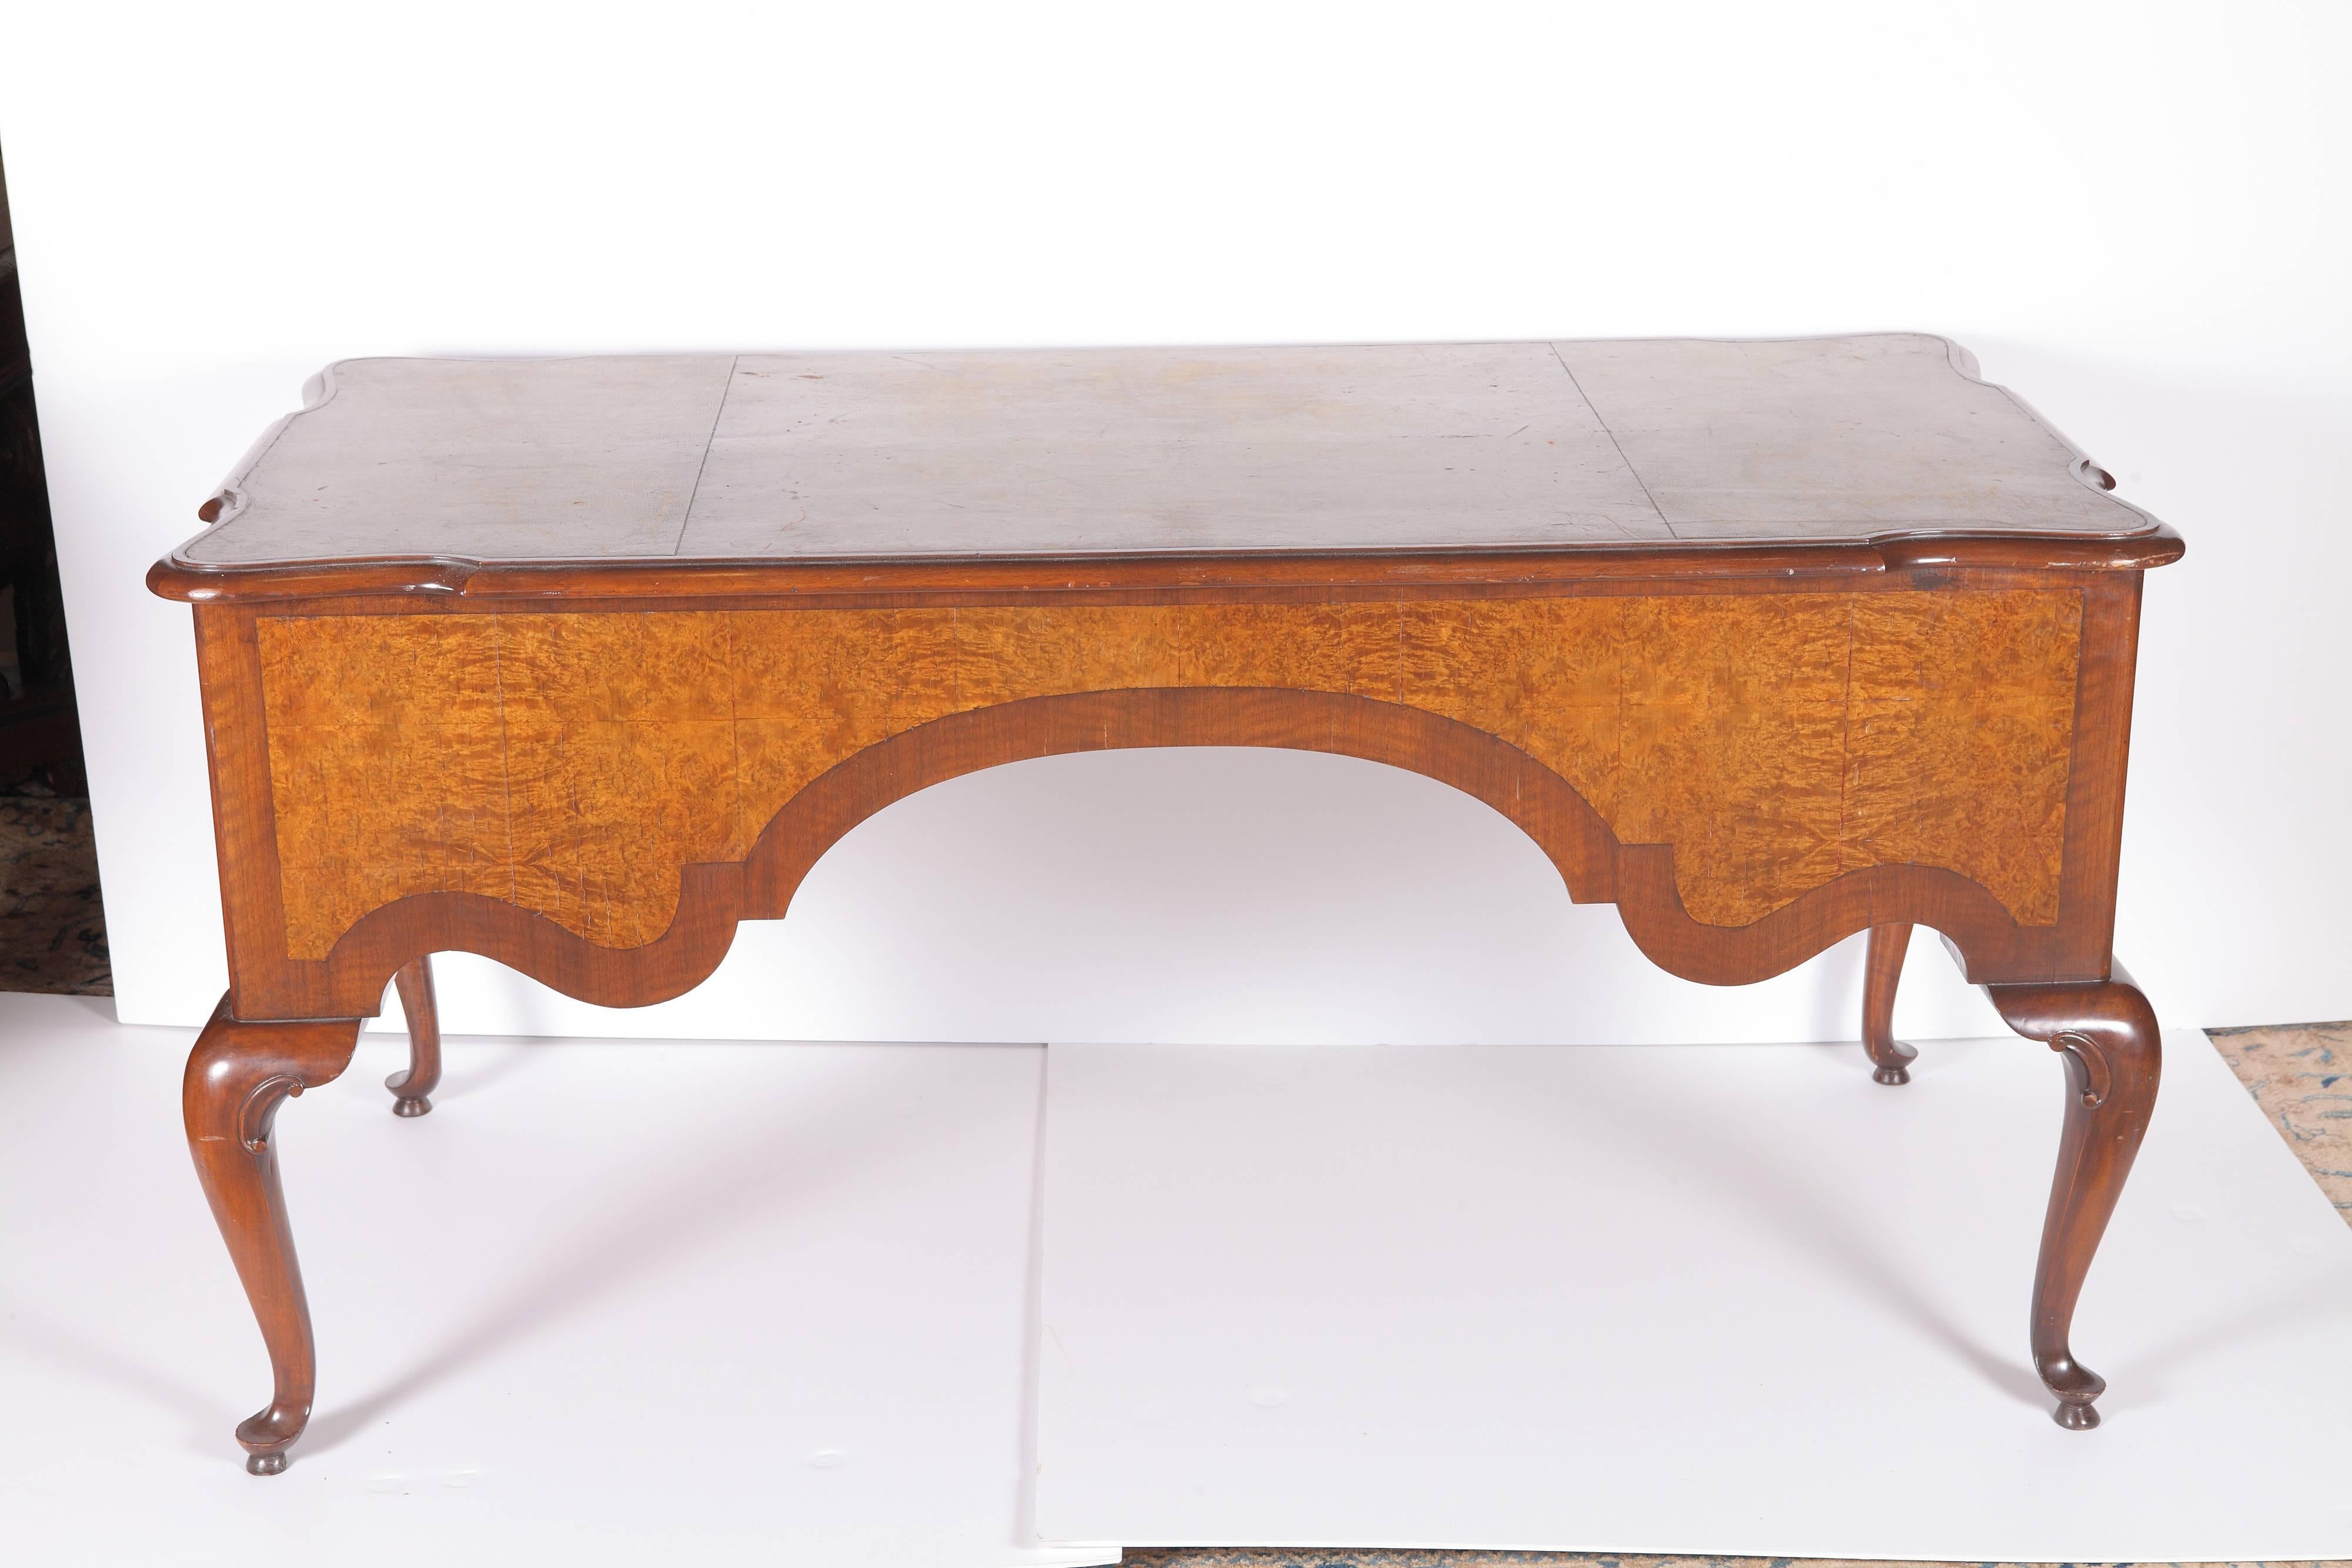 19th century walnut and burr walnut veneer Queen Anne style desk with leather top.